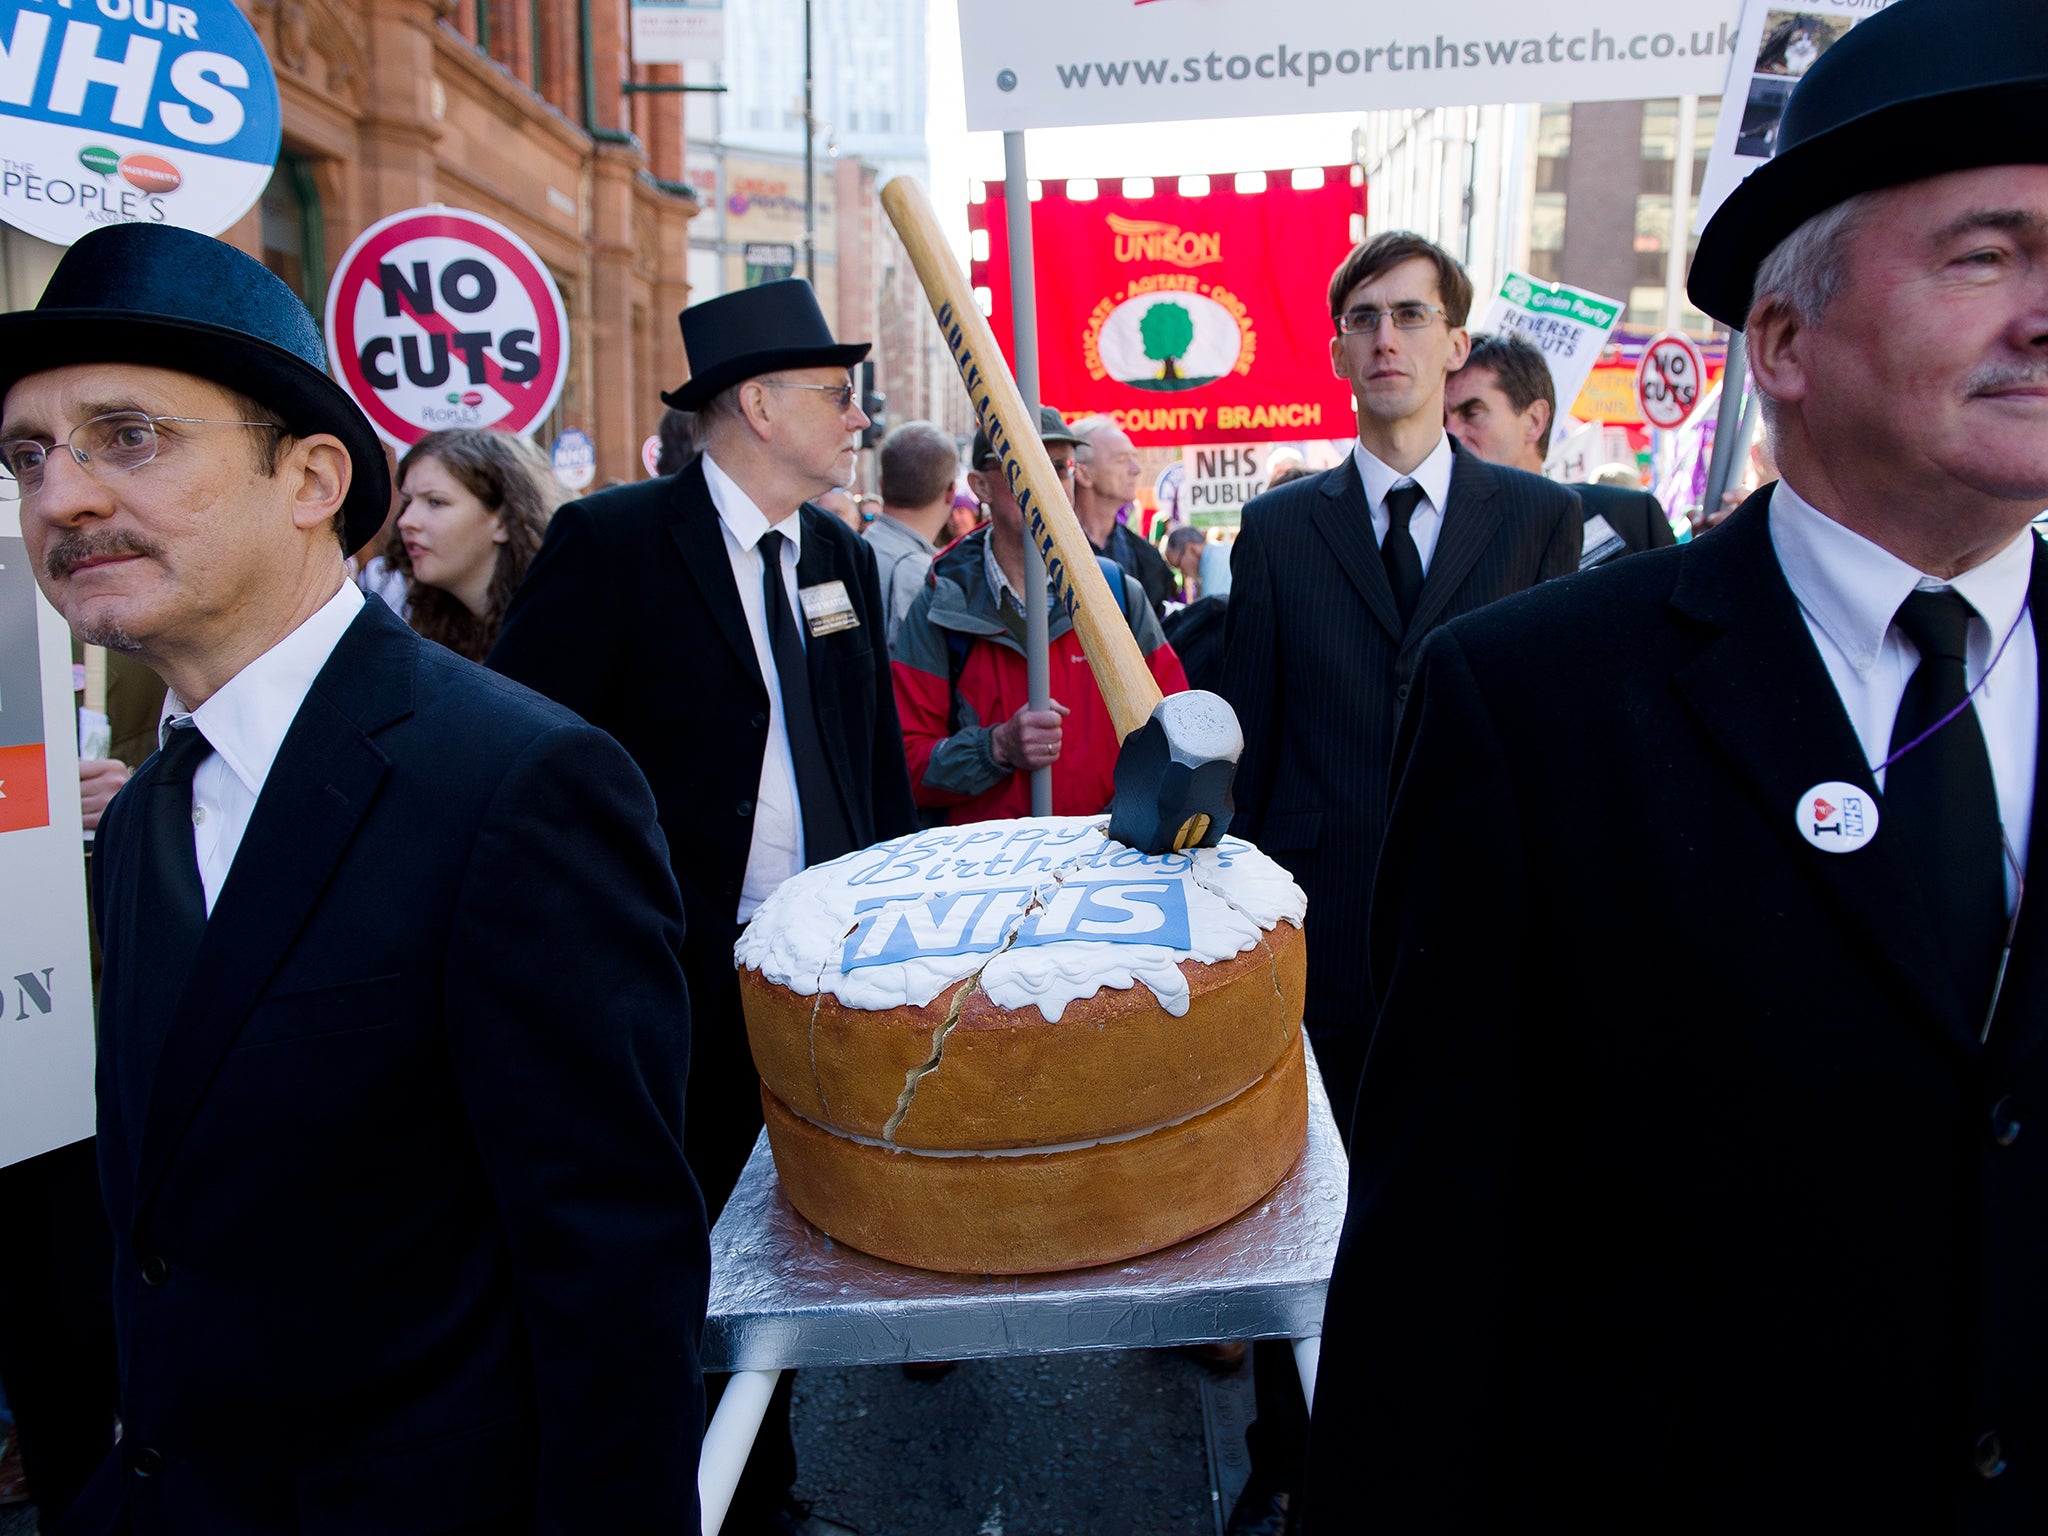 Protesters during a march in support of the NHS and against proposed cuts and privatisation in Manchester in 2013